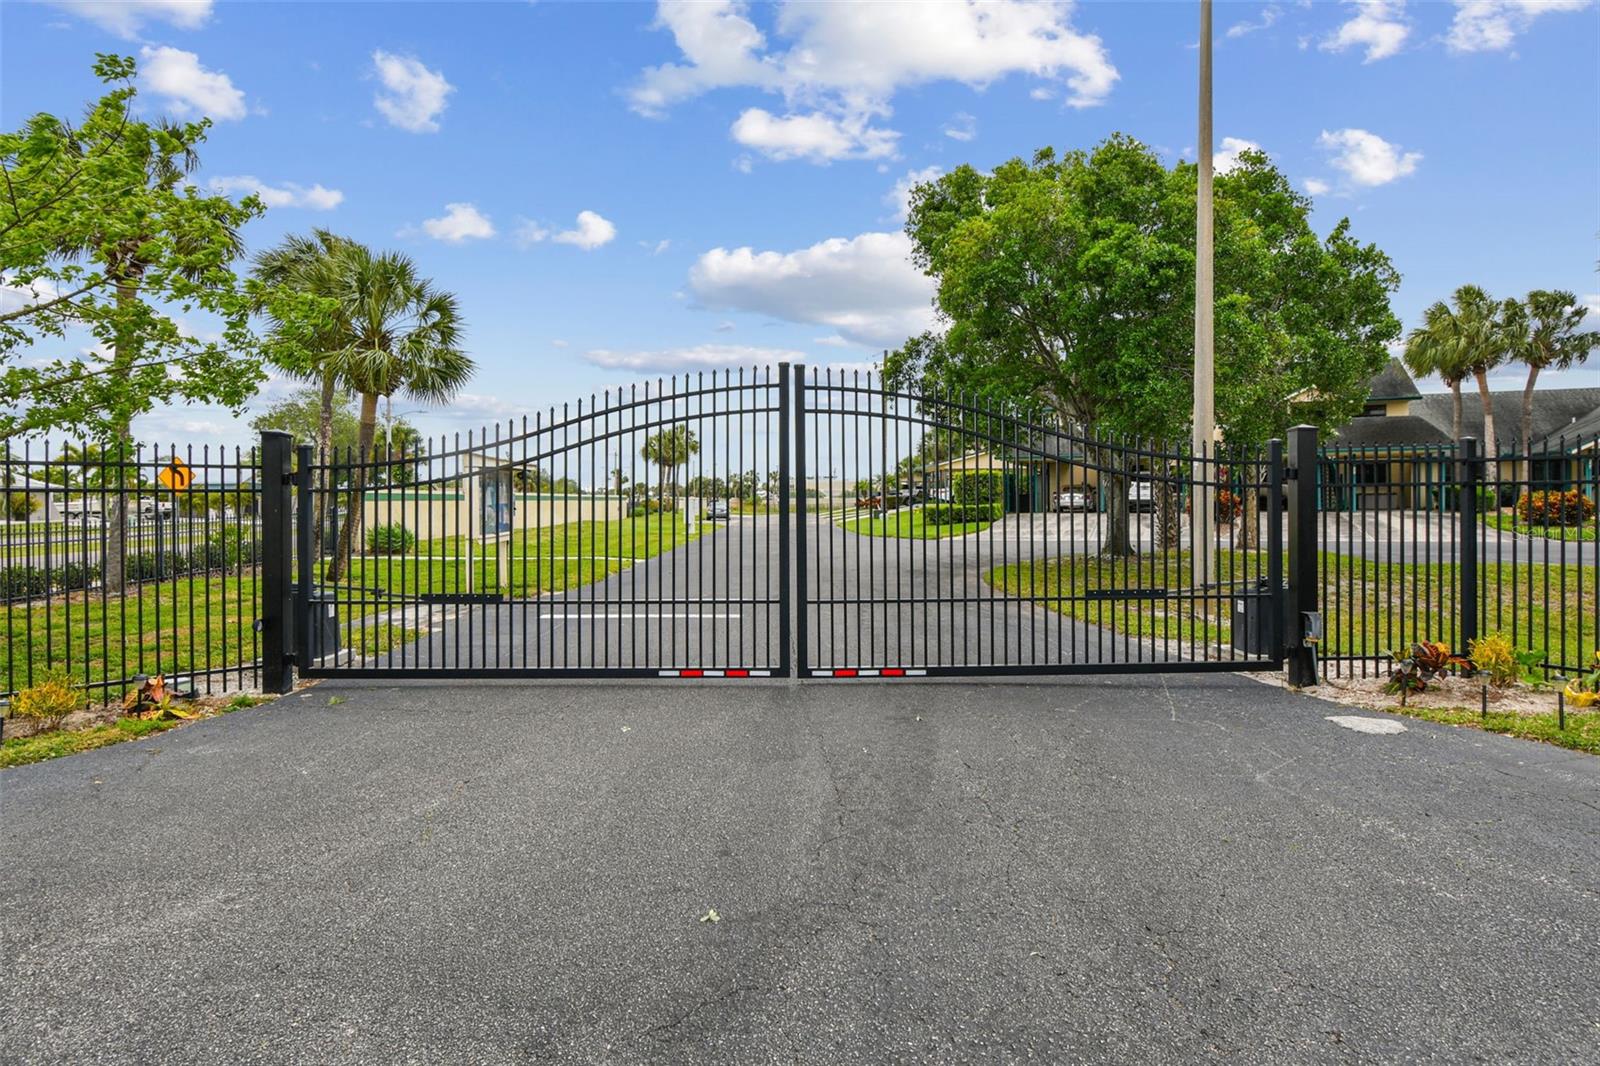 Security gate has key fob for easy owner access.